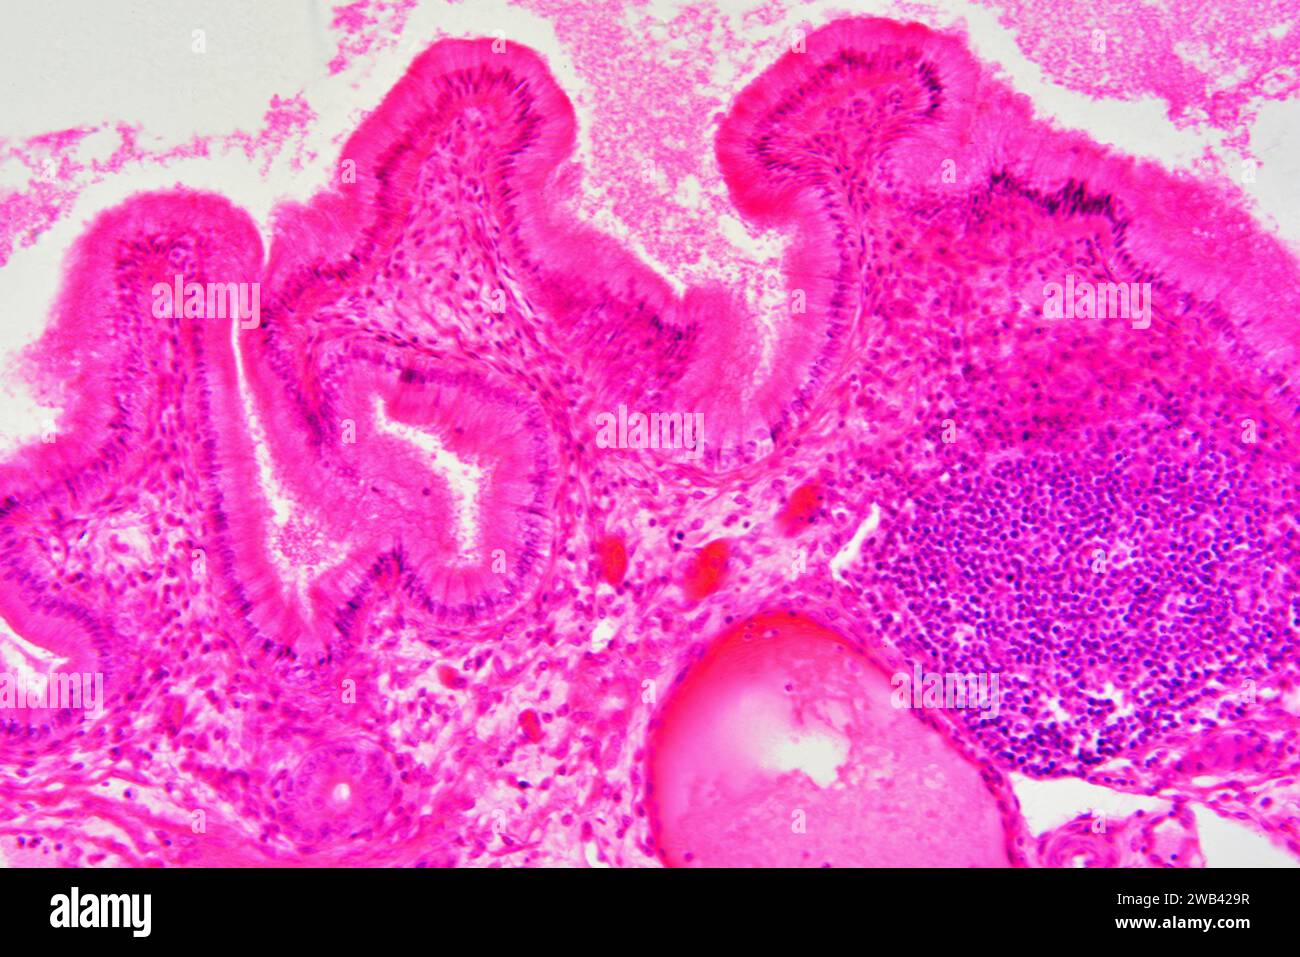 Gallbladder wall showing columnar epithelium with mucosal folds, connective tissue, blood vessels and smooth muscle fibers. Photomicrograph X150 at 10 Stock Photo